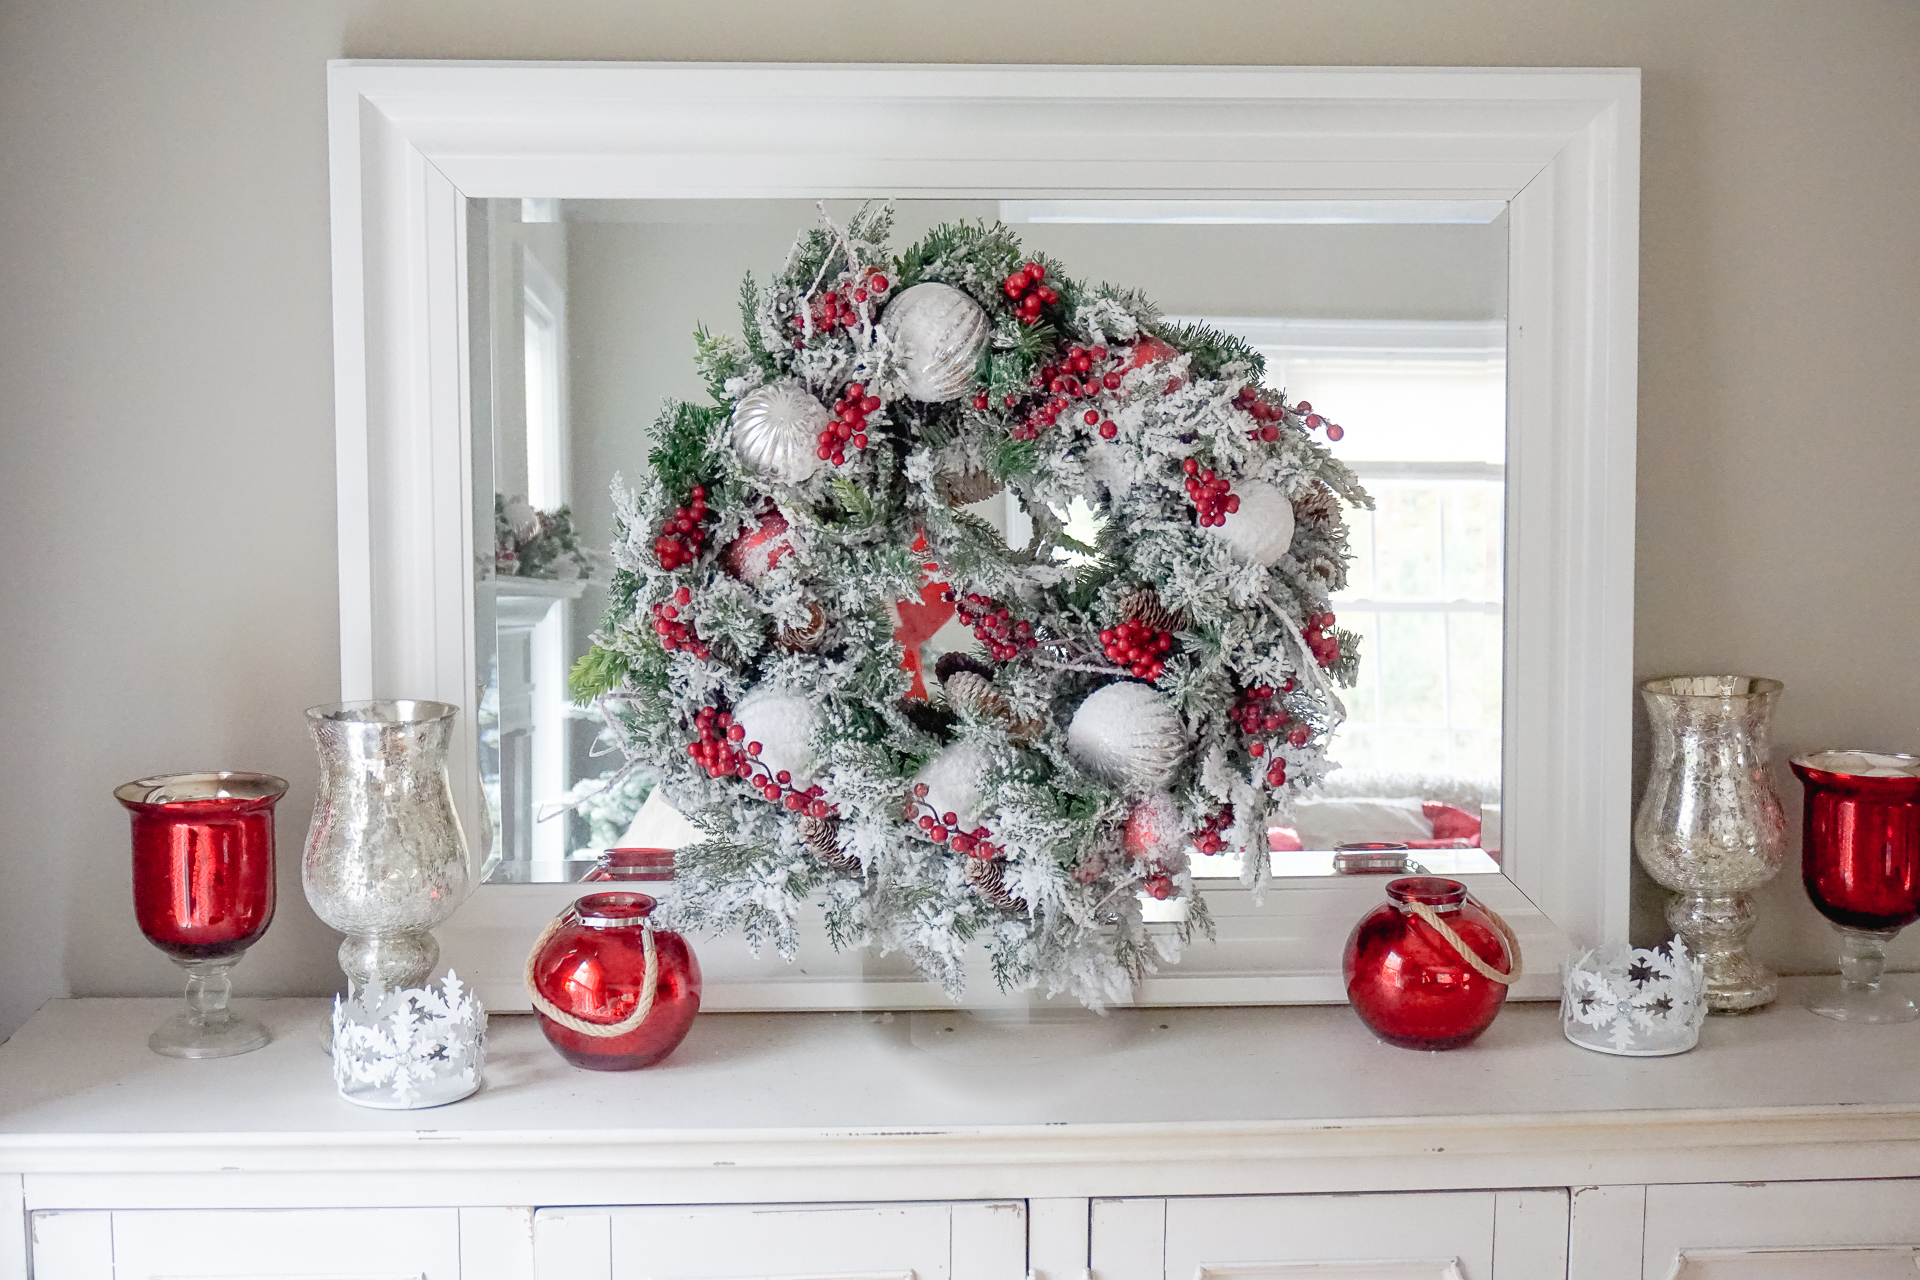 Artificial Christmas Tree - Holiday Decor All Around the House - Christmas Tree Ideas via Misty Nelson, frostedblog @frostedevents.com 